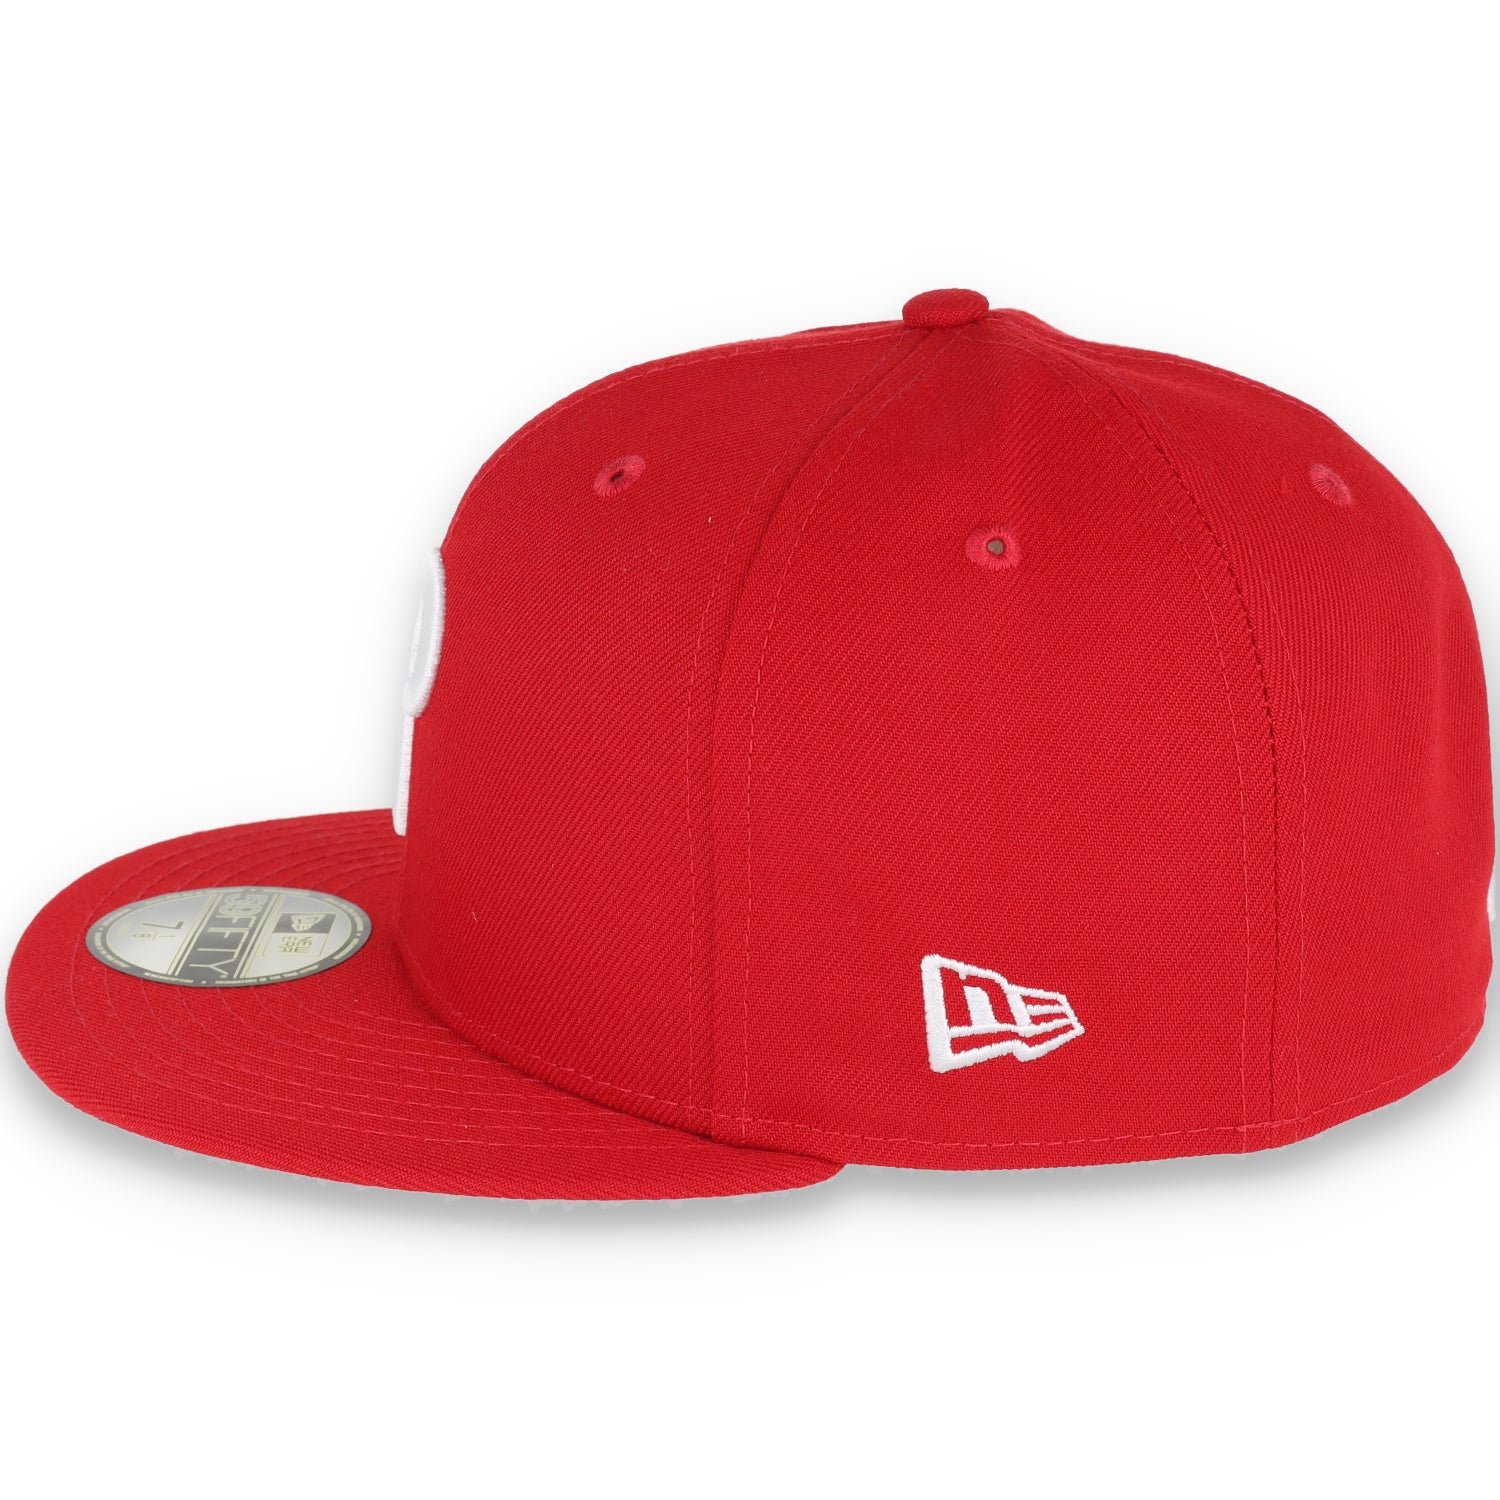 NEW ERA PHILADELPHIA PHILLIES INAUGURAL SEASON PATCH 59FIFTY FITTED HAT